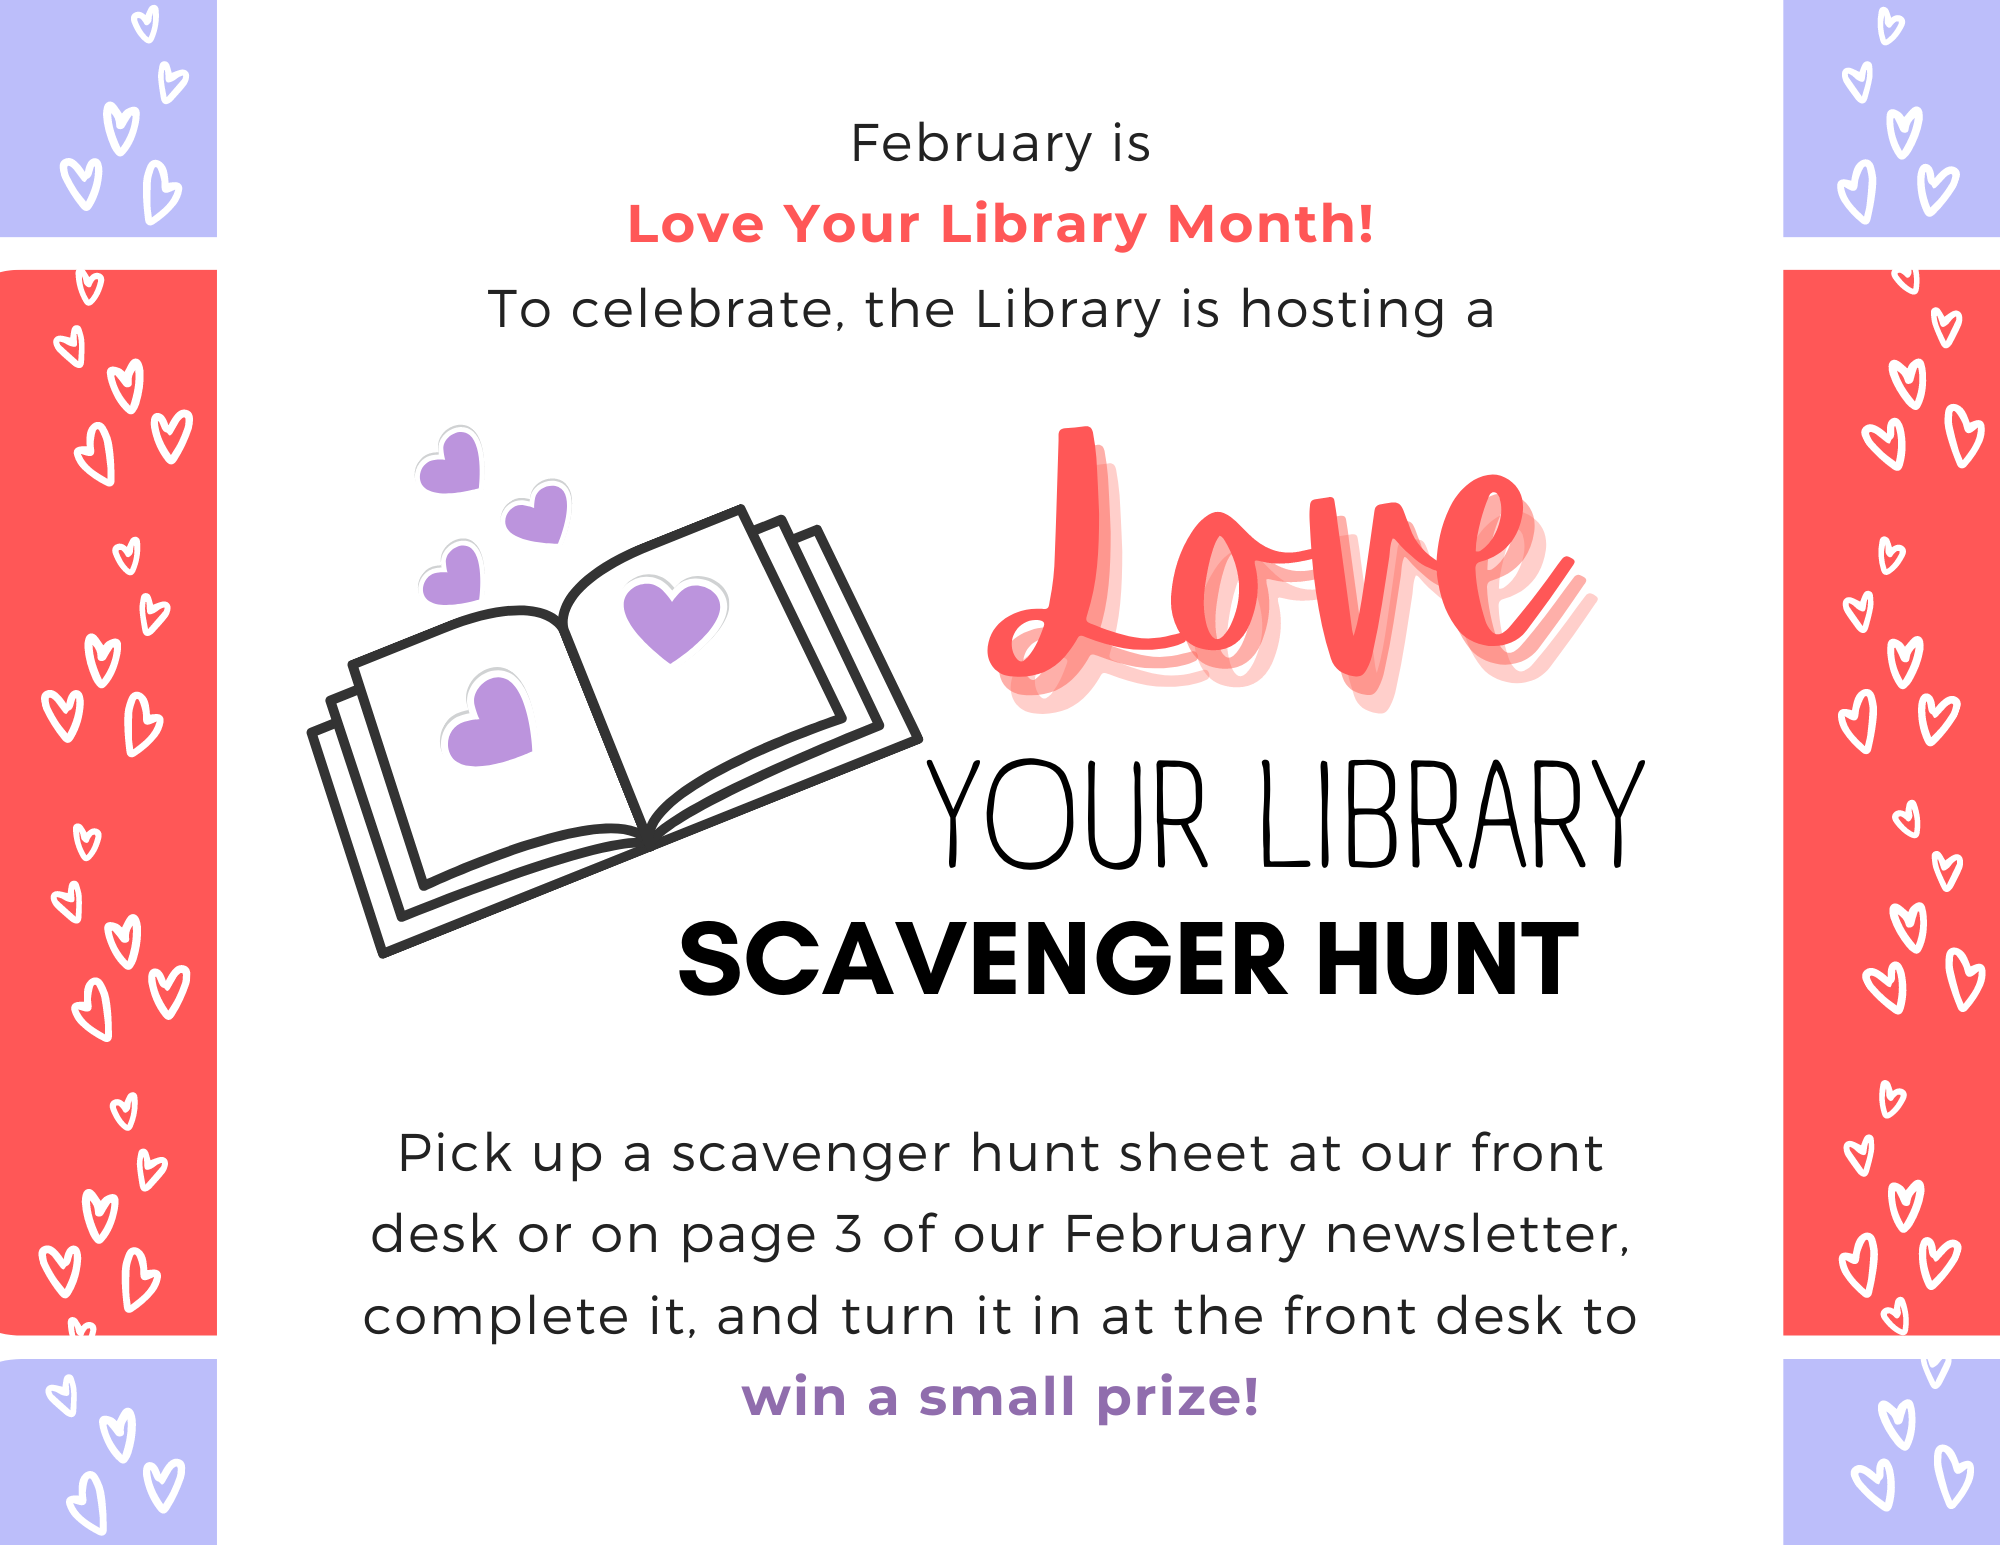 February is Love Your Library Month! To celebrate, the Library is hosting a scavenger hunt all month long!